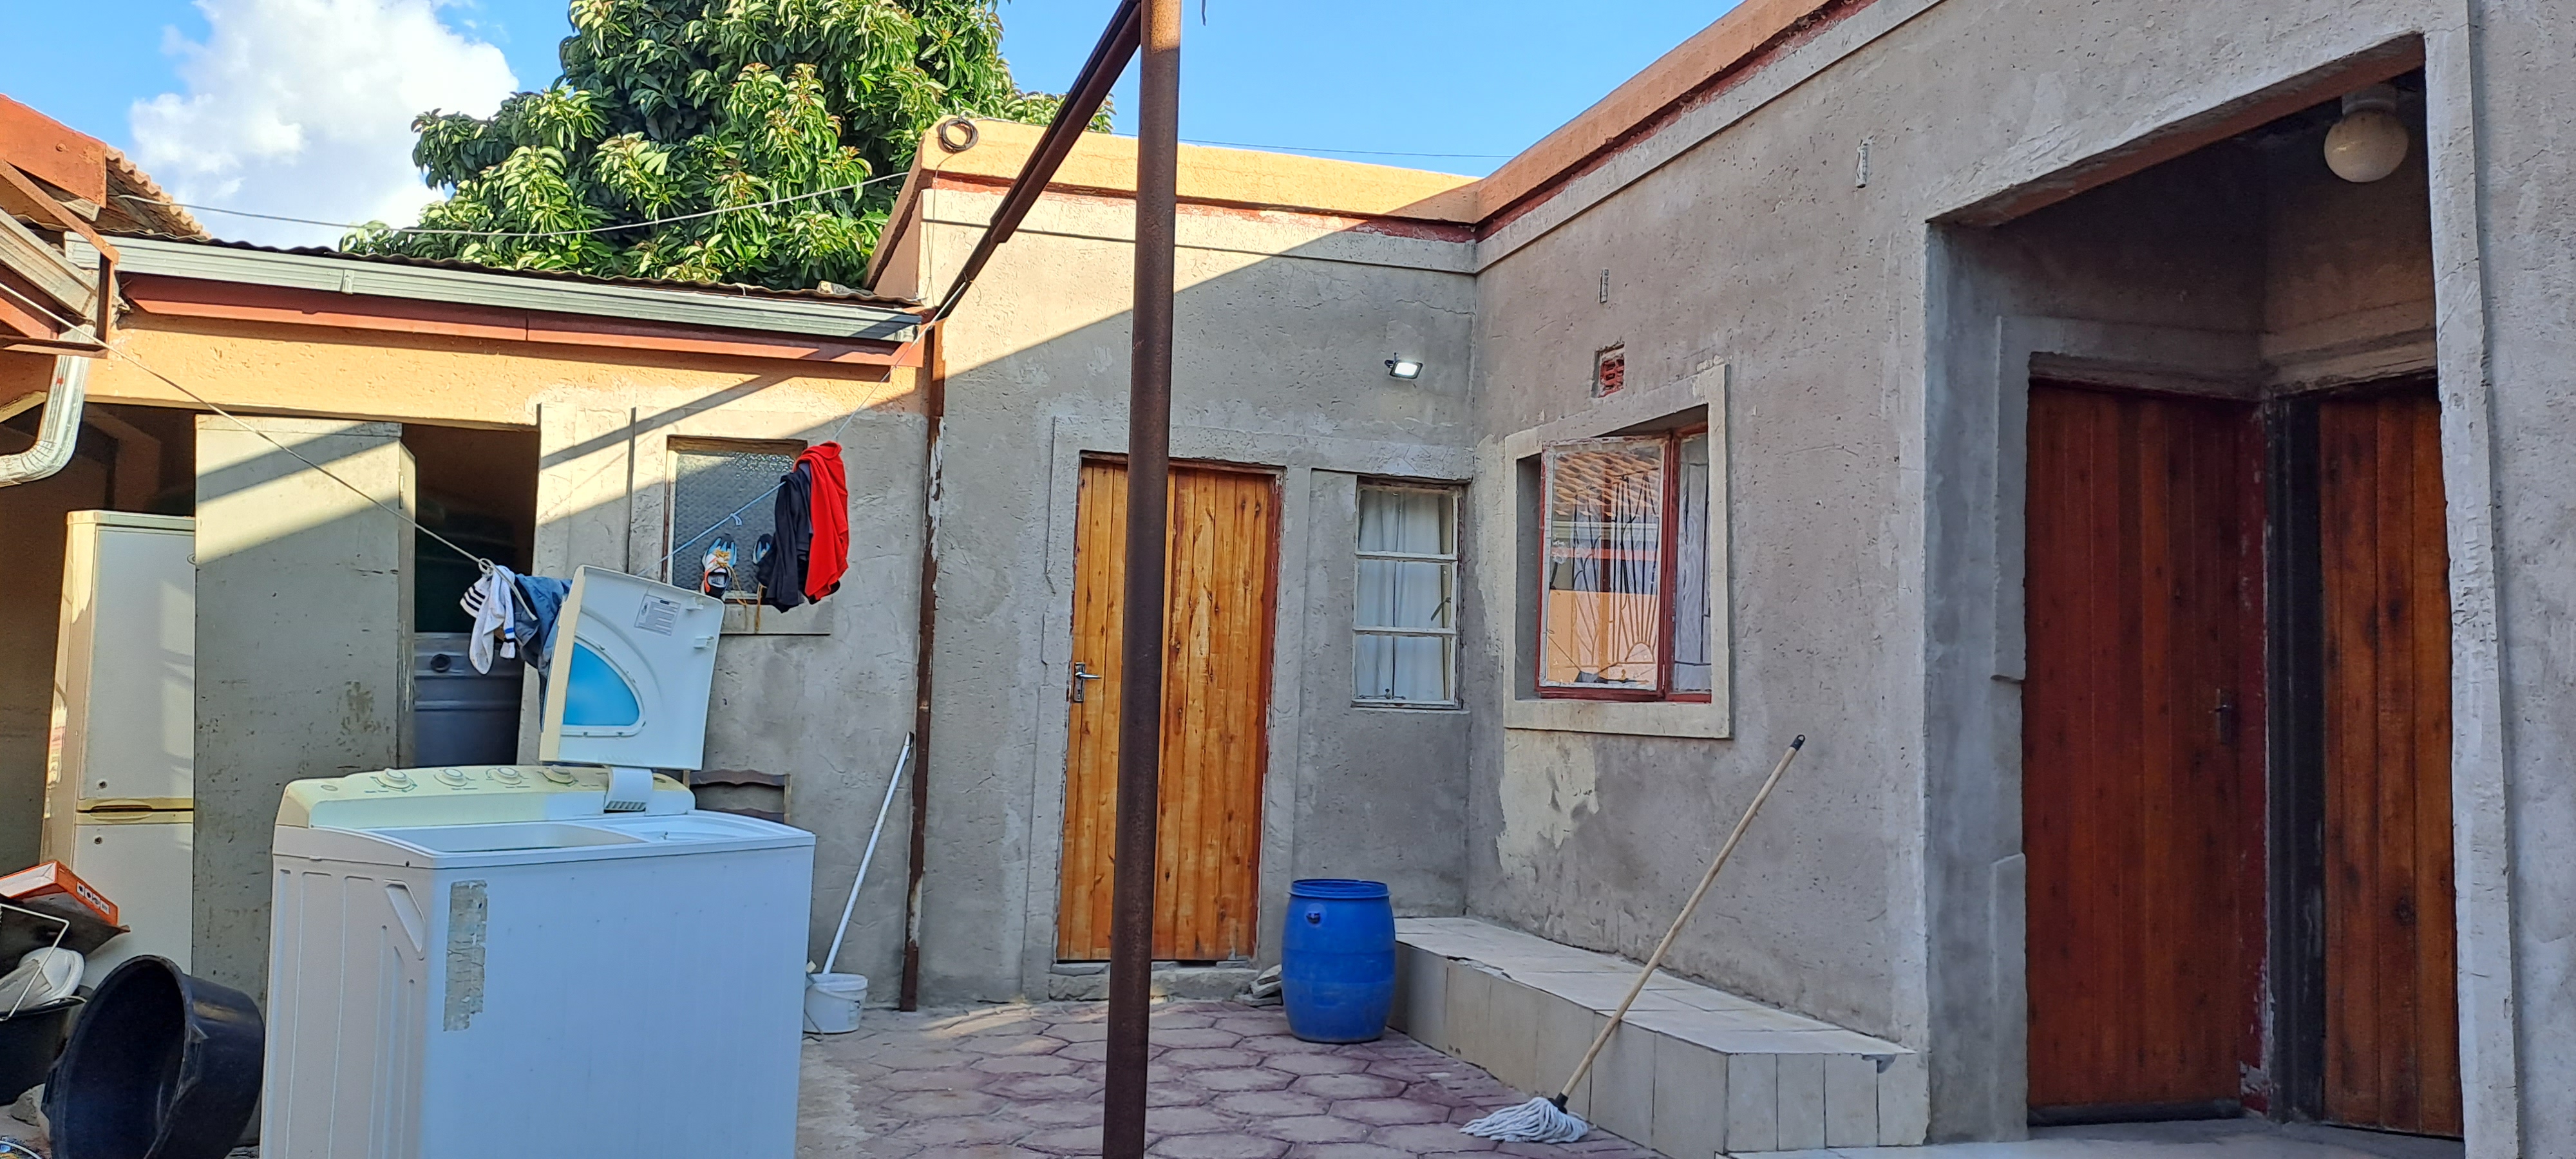 5 Bedroom Property for Sale in Seshego Limpopo